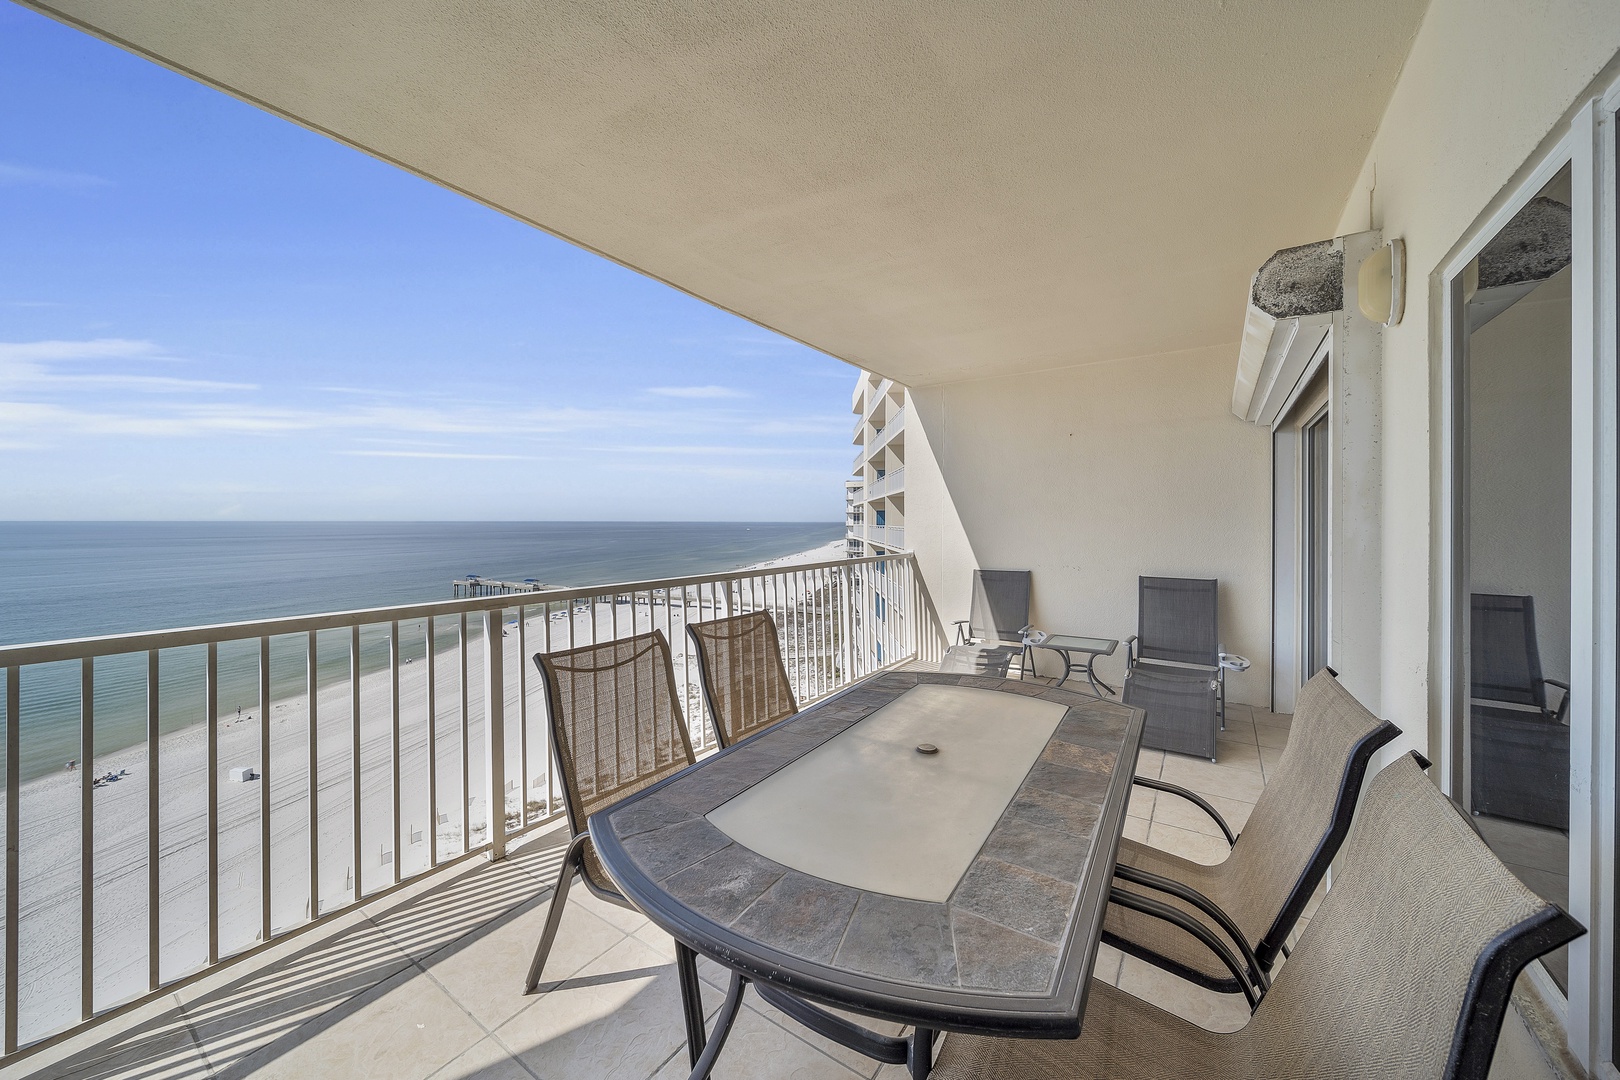 Balcony with Gulf view outdoor dining and 2 loungers